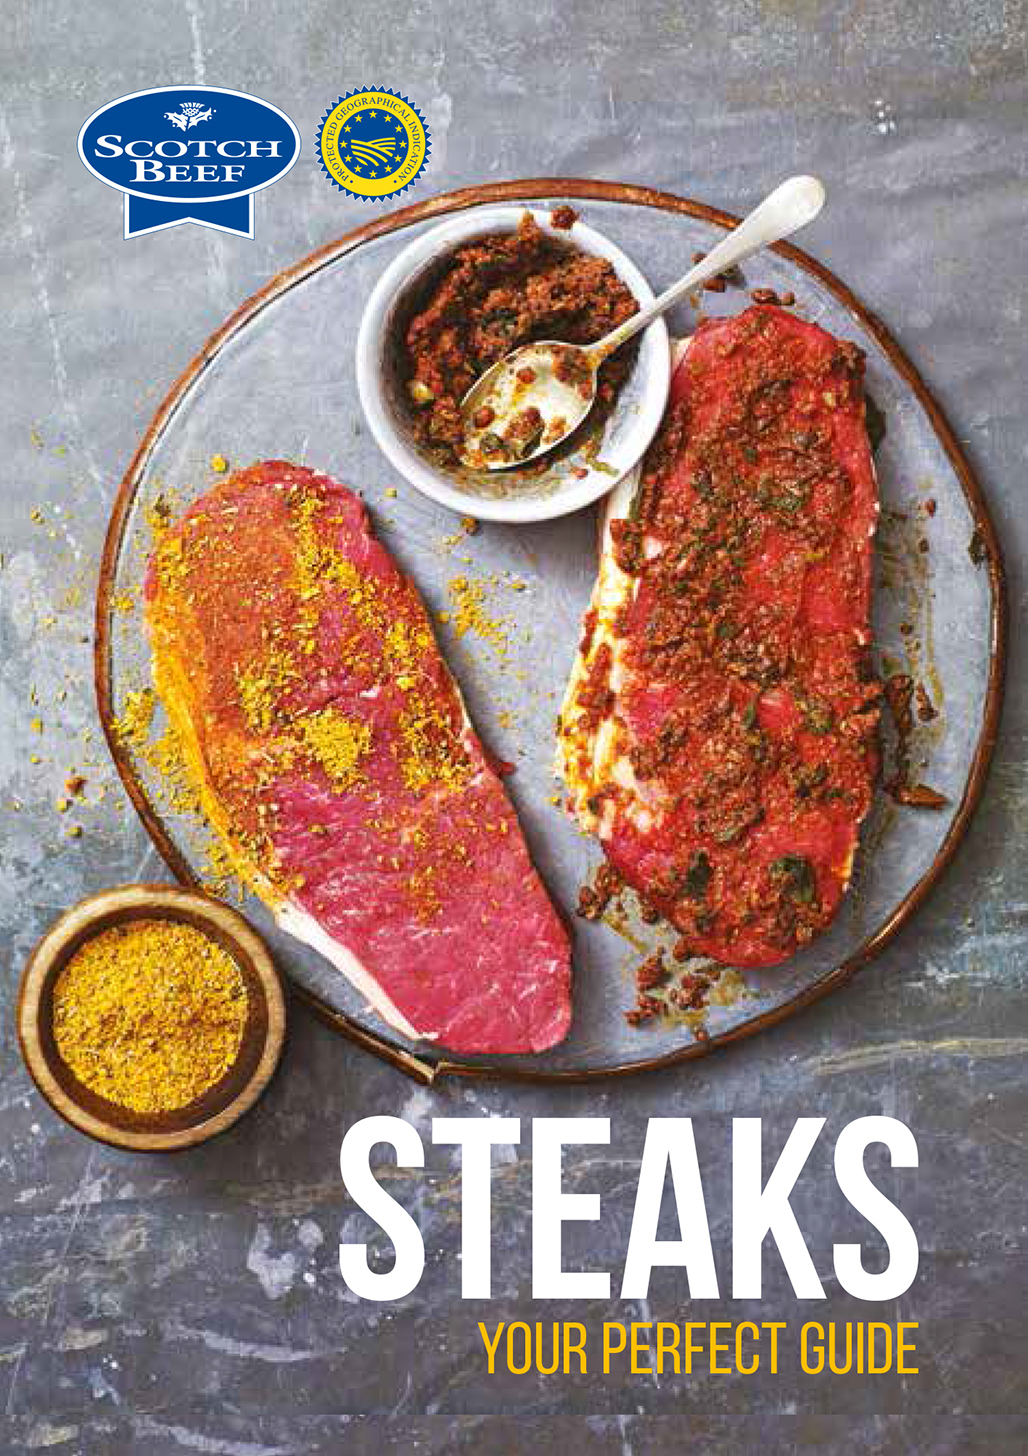 Quality Meat Scotland has published Steaks – Your Perfect Guide